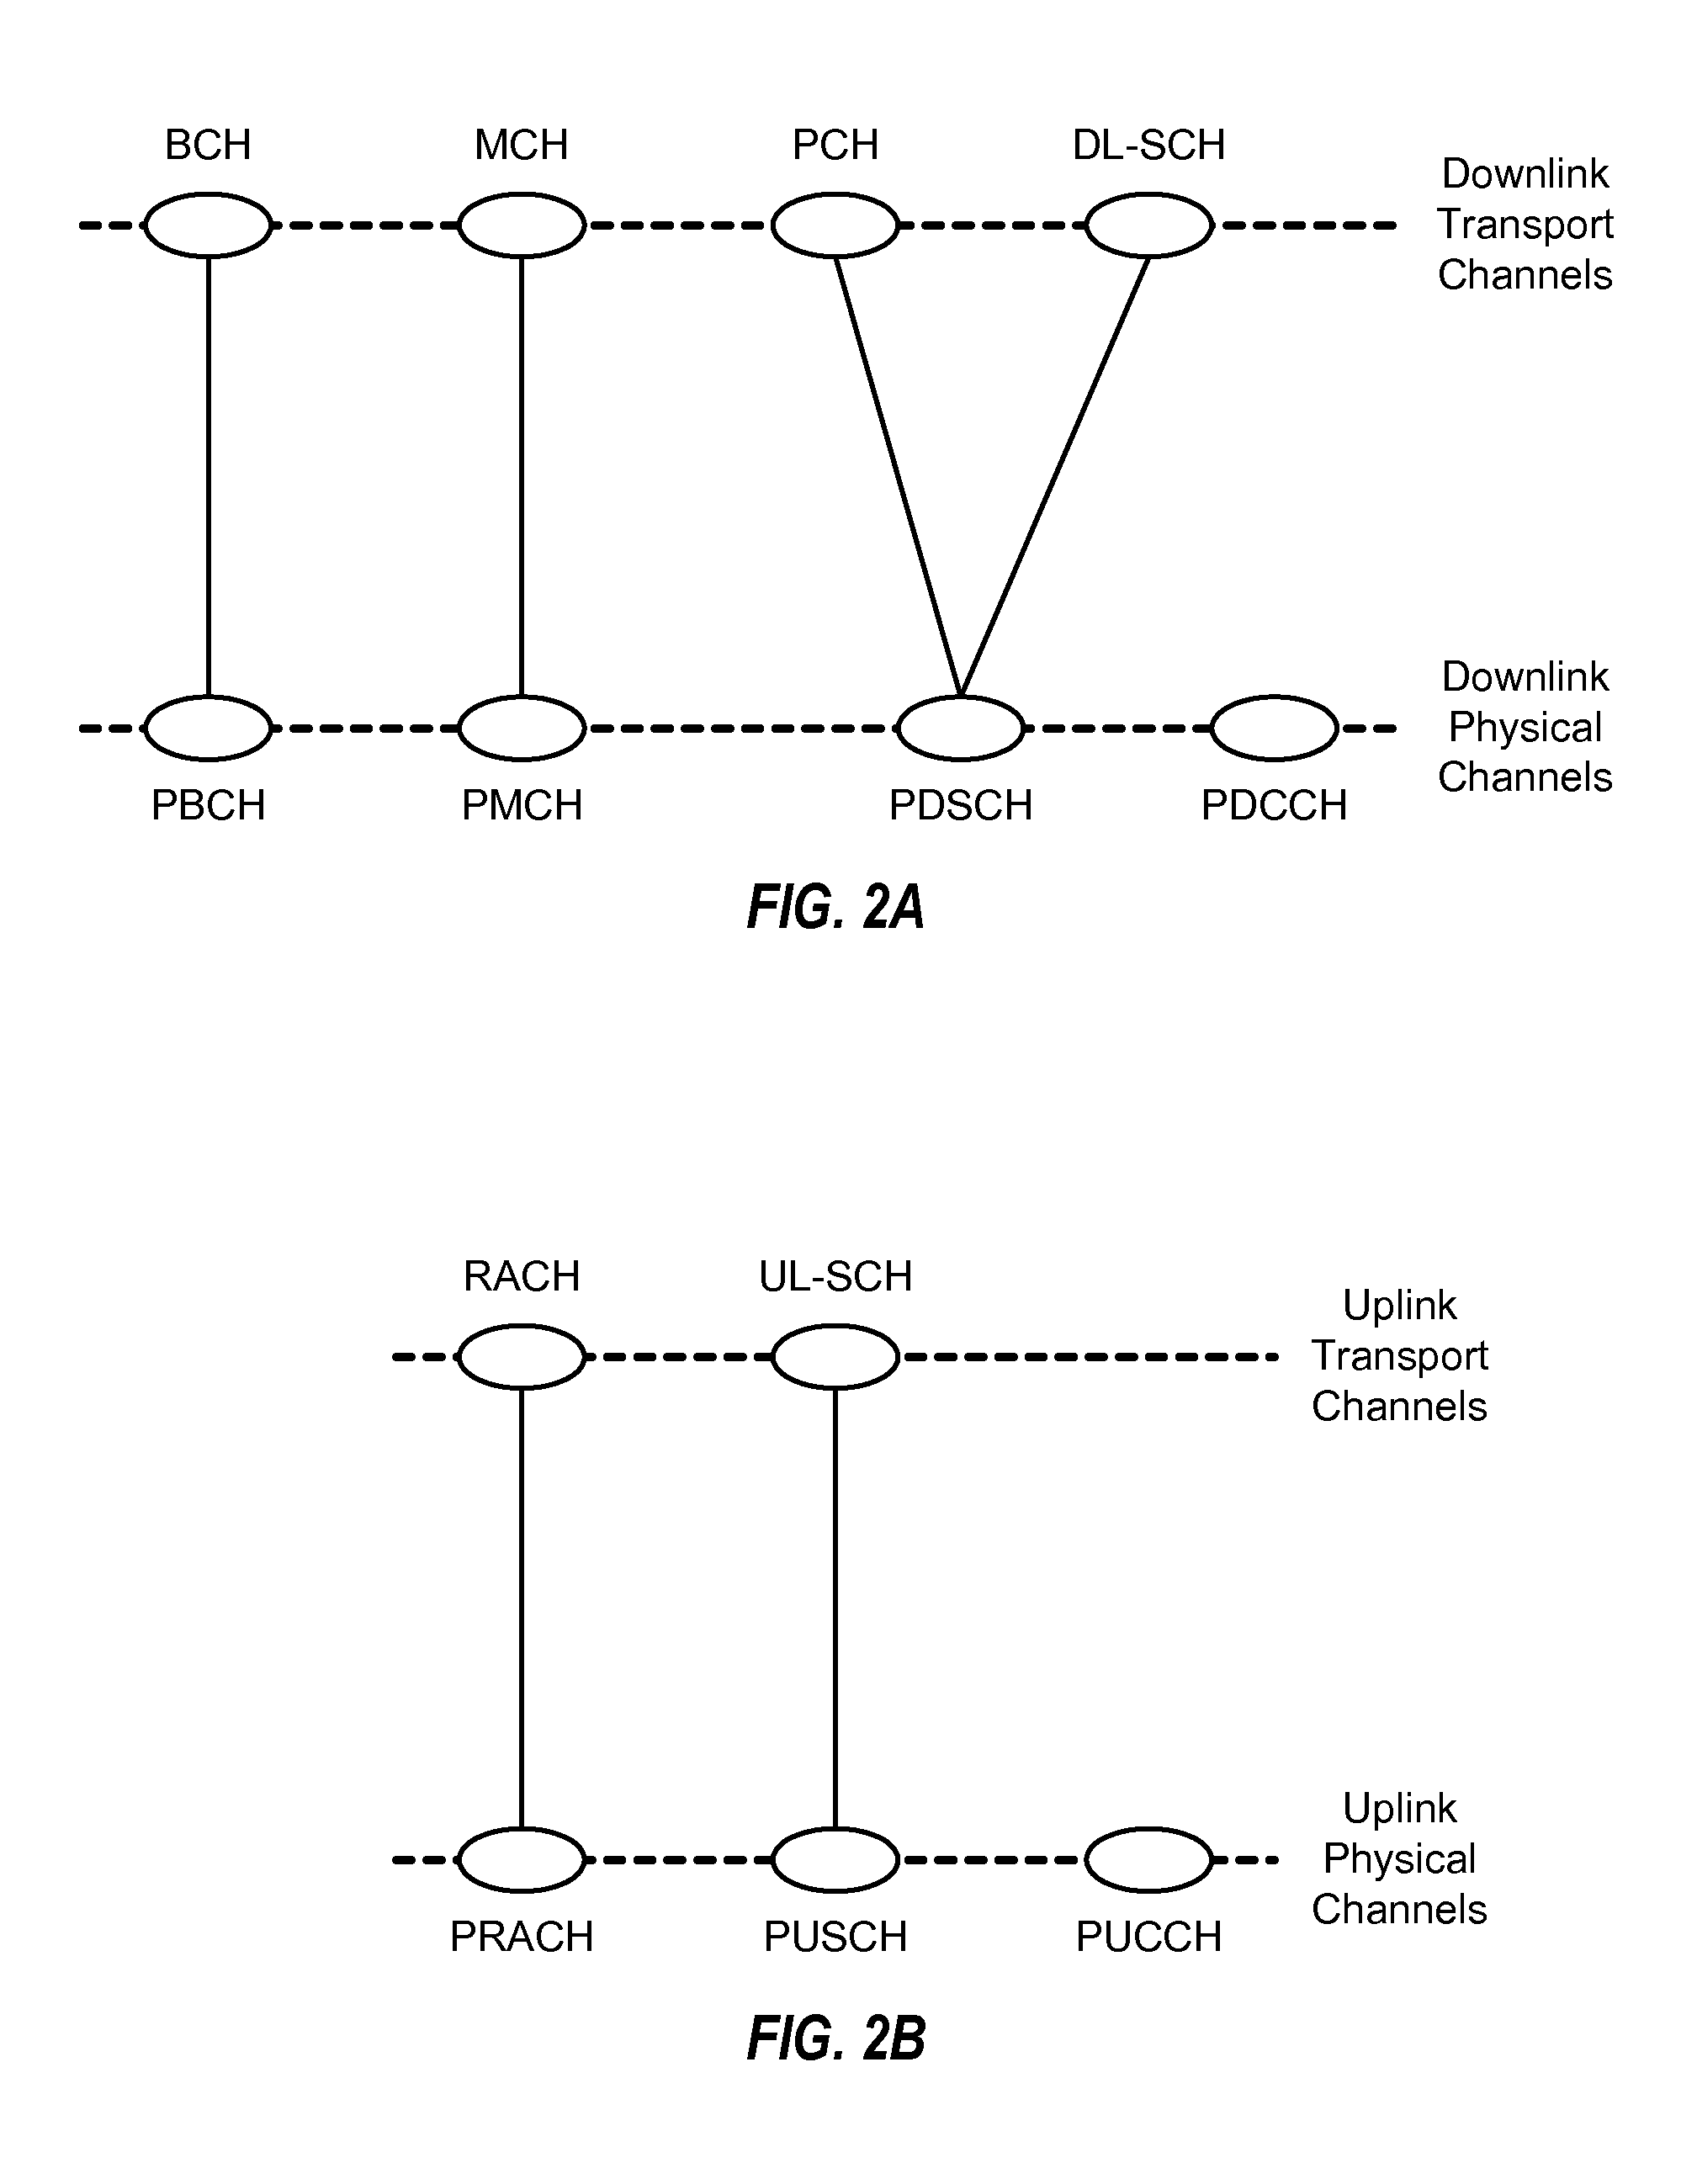 Interference mitigation for control channels in a wireless communication network